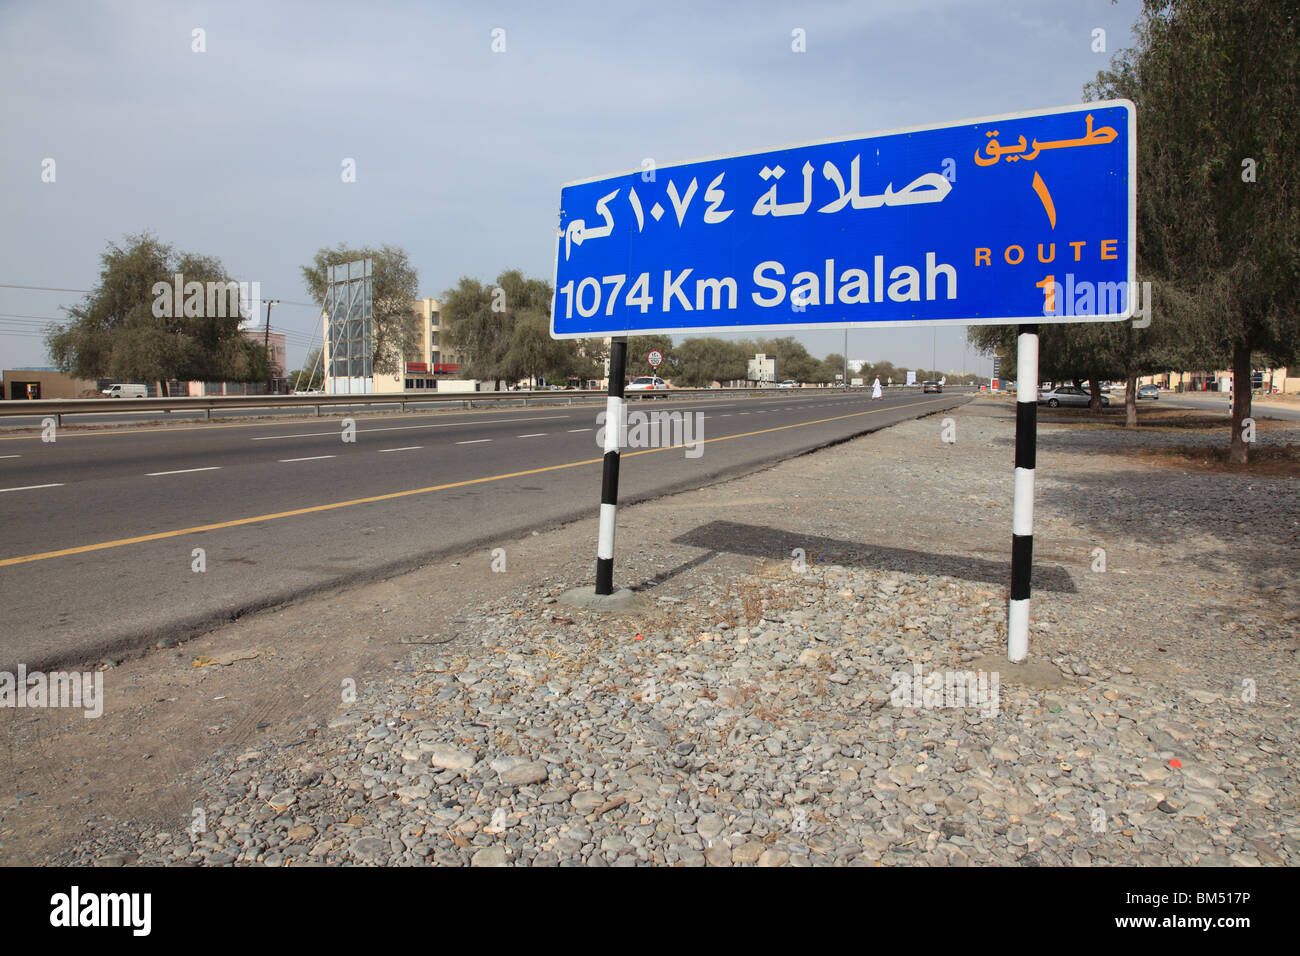 bilingual street direction sign, highway route No1 near Muscat showing 1074 km  distance to Salalah,Oman.Photo by Willy Matheisl Stock Photo